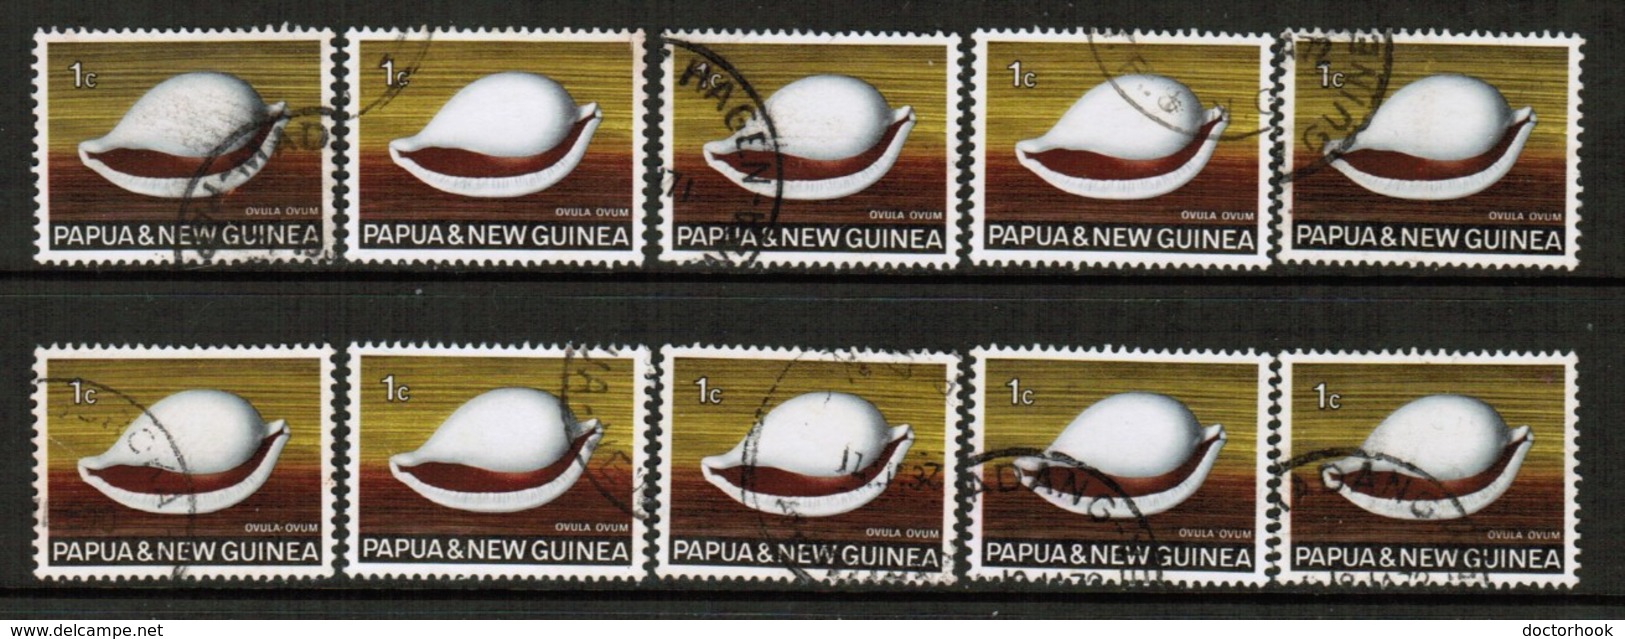 PAPUA NEW GUINEA  Scott # 265 USED WHOLESALE LOT OF 10 (WH-402) - Lots & Kiloware (mixtures) - Max. 999 Stamps